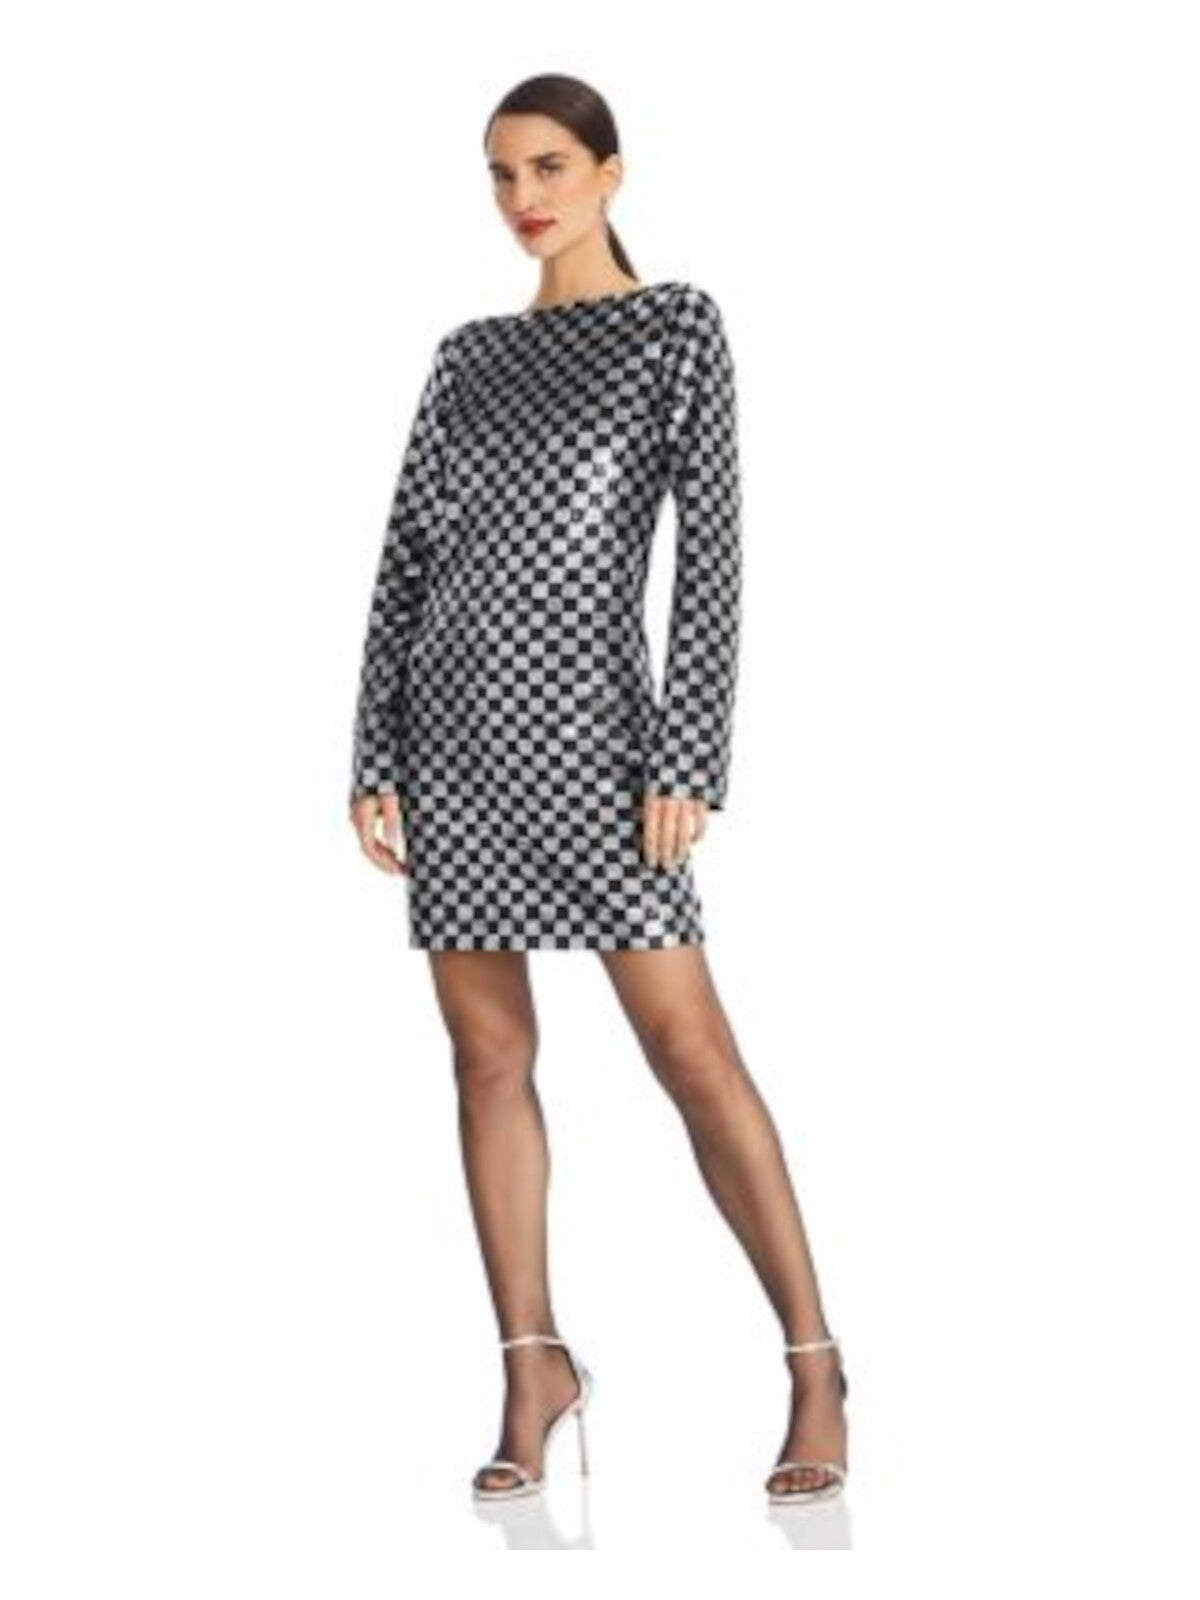 MICHAEL KORS Womens Black Sequined Zippered Lined Check Long Sleeve Boat Neck Above The Knee Cocktail Sheath Dress 10